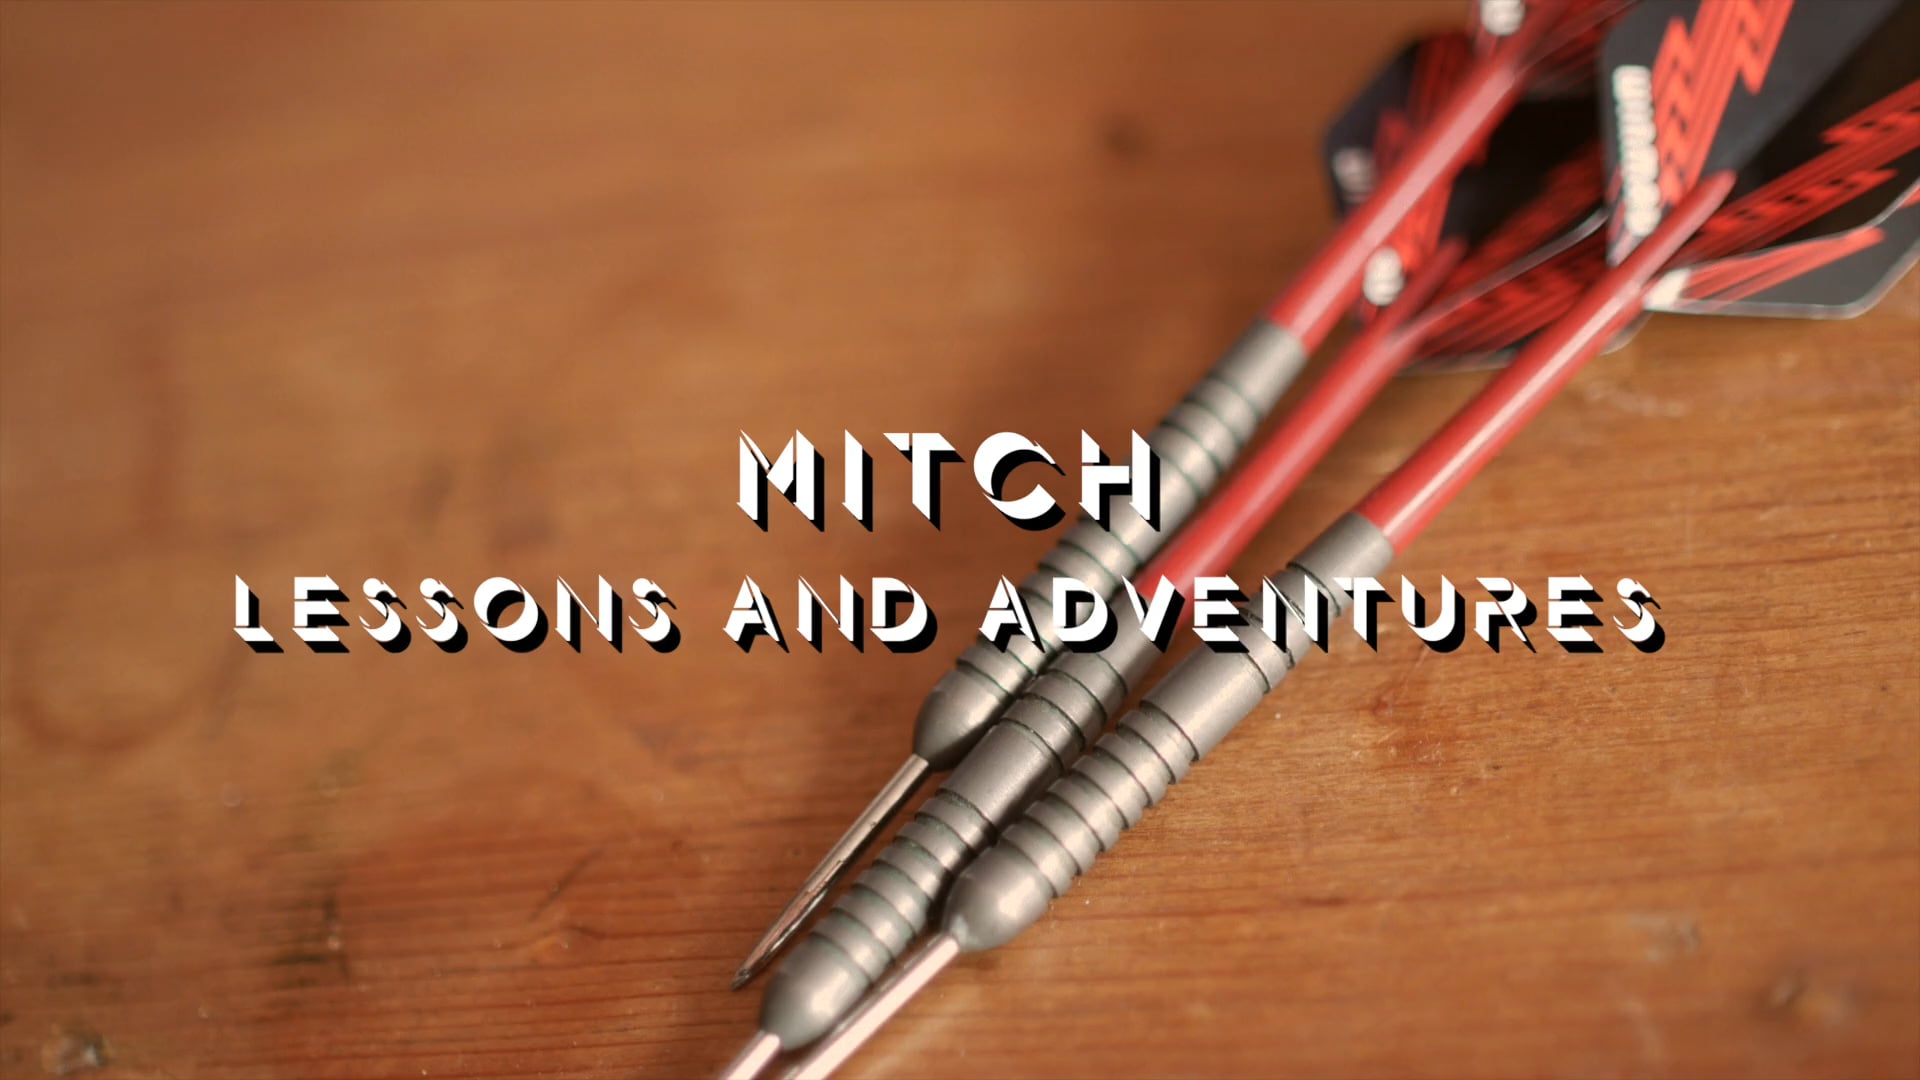 Mitch Lessons and Adventures 2